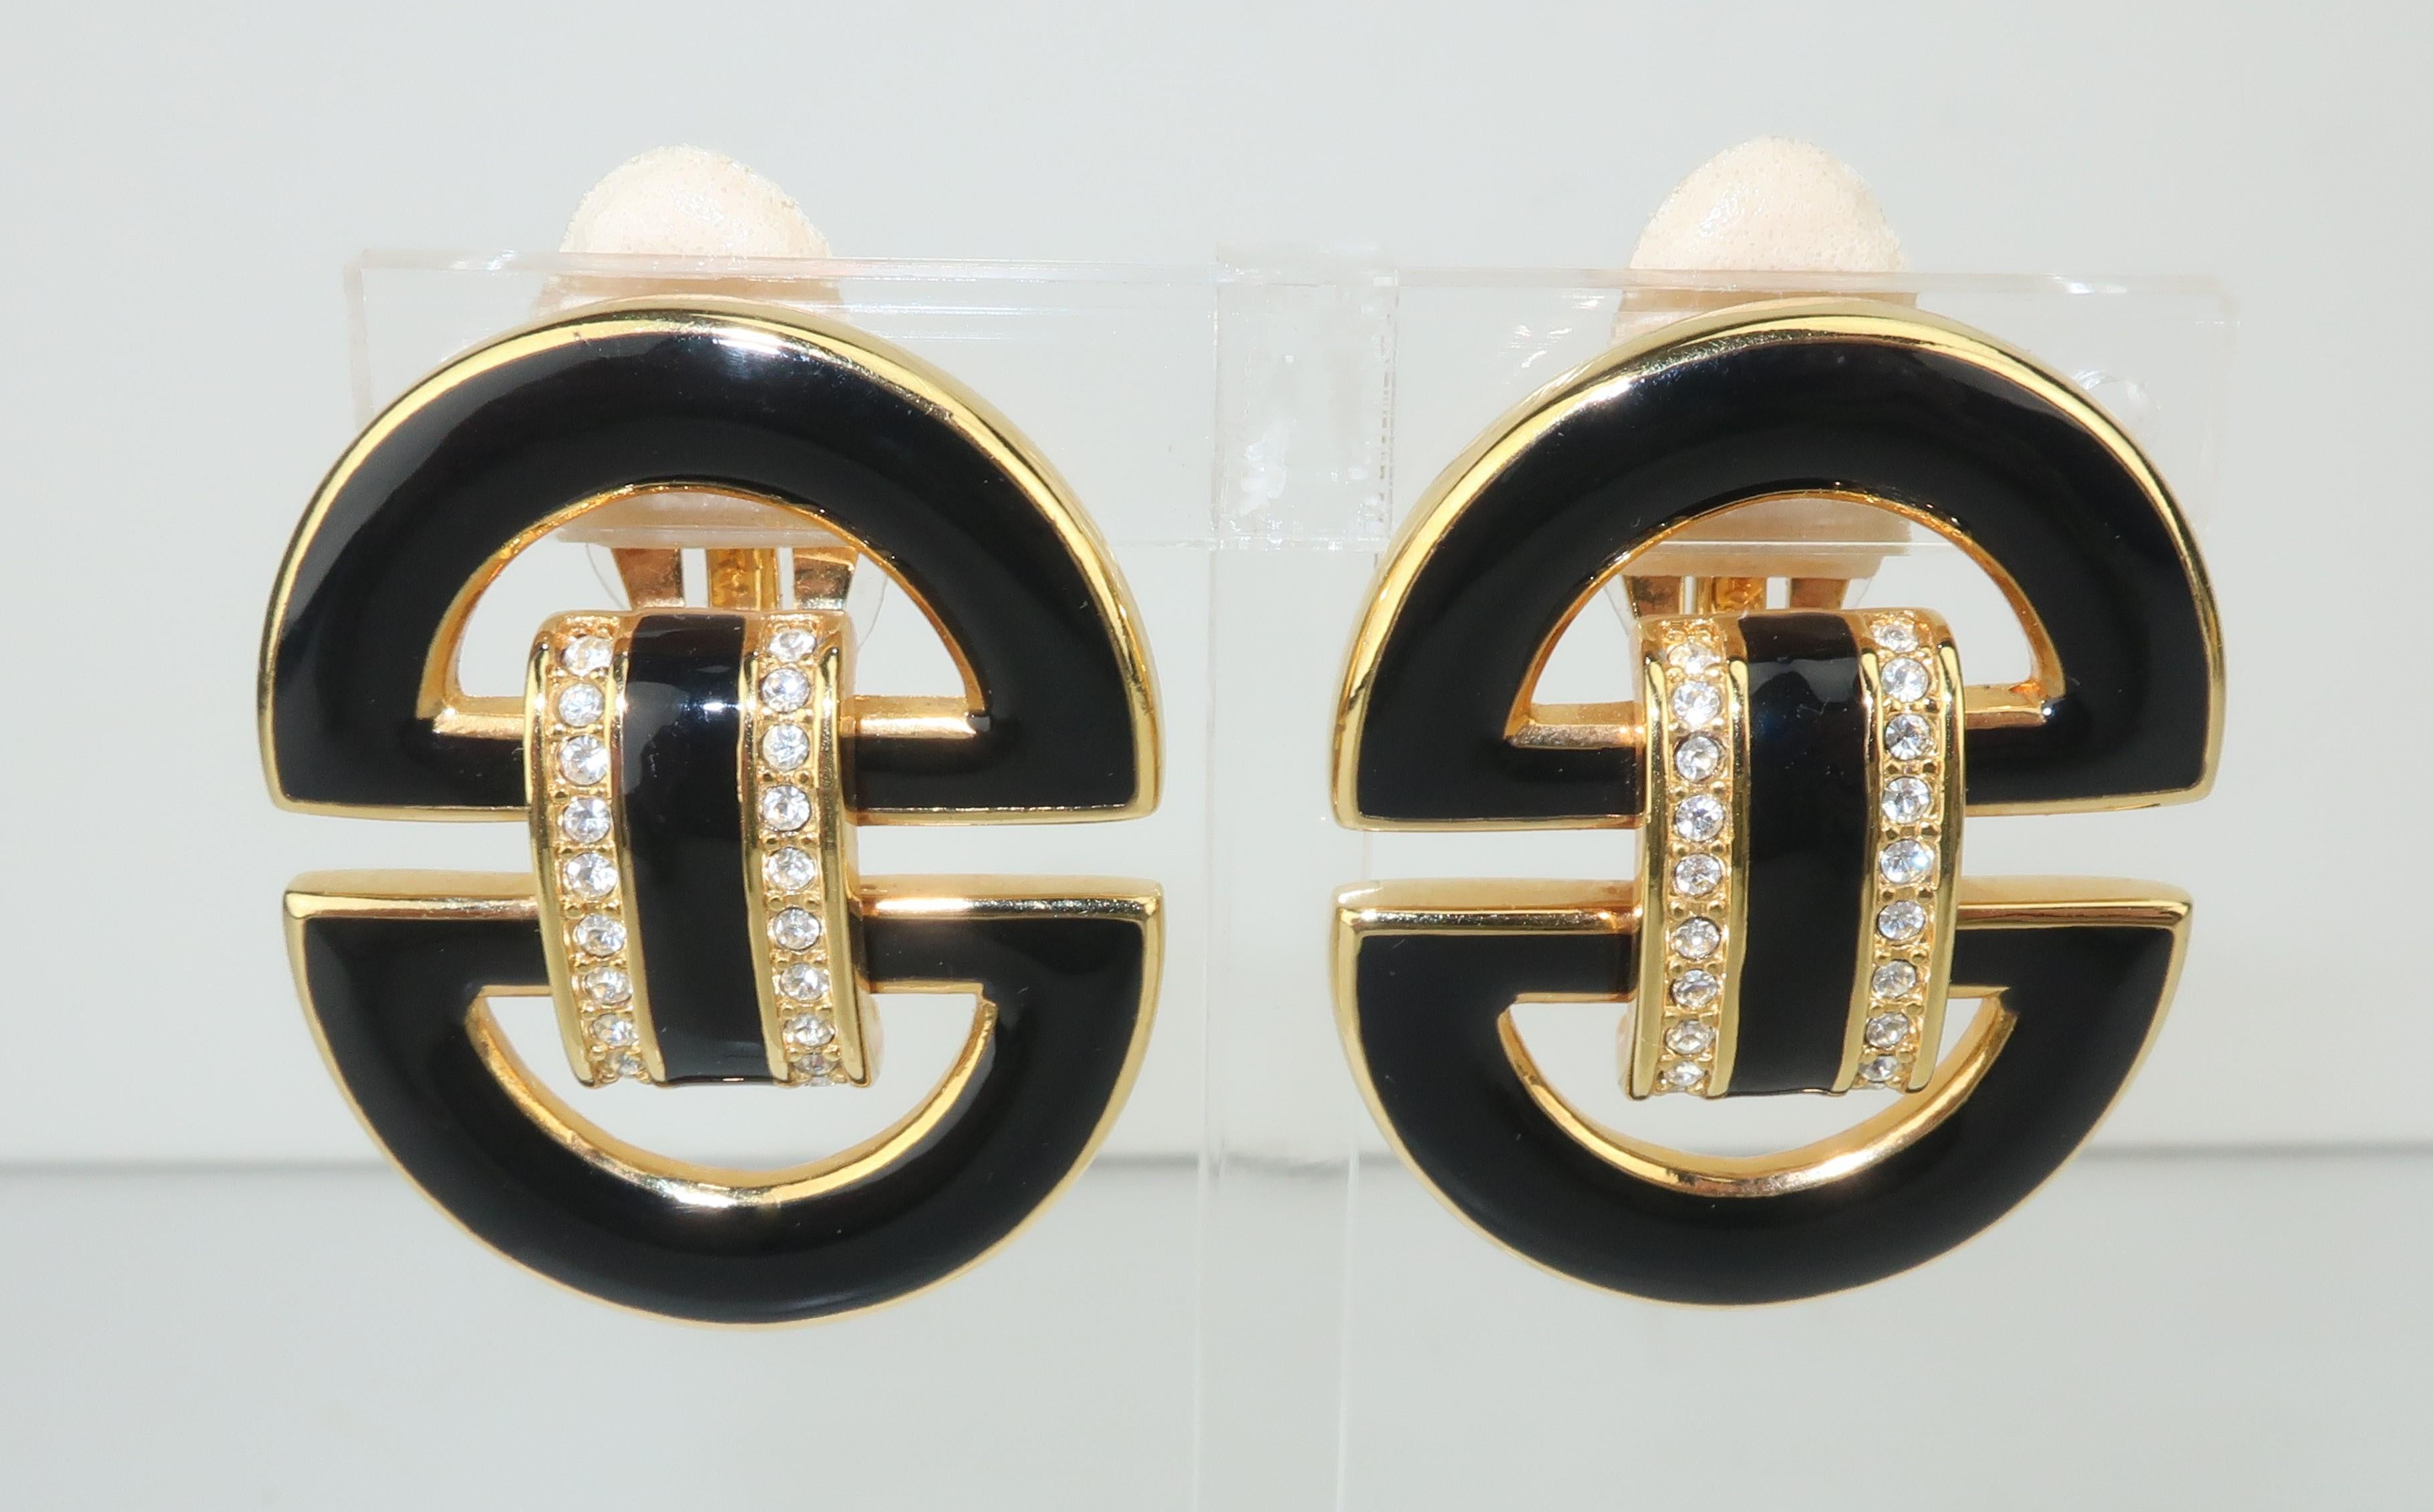 Stylish and chic Swarovski America Ltd. black enamel on gold earrings with crystal accents in a door knocker silhouette.  Outfitted with clip on hardware and hallmarked ‘S.A.L.’ at the back.  Very good vintage condition with removable pads added by